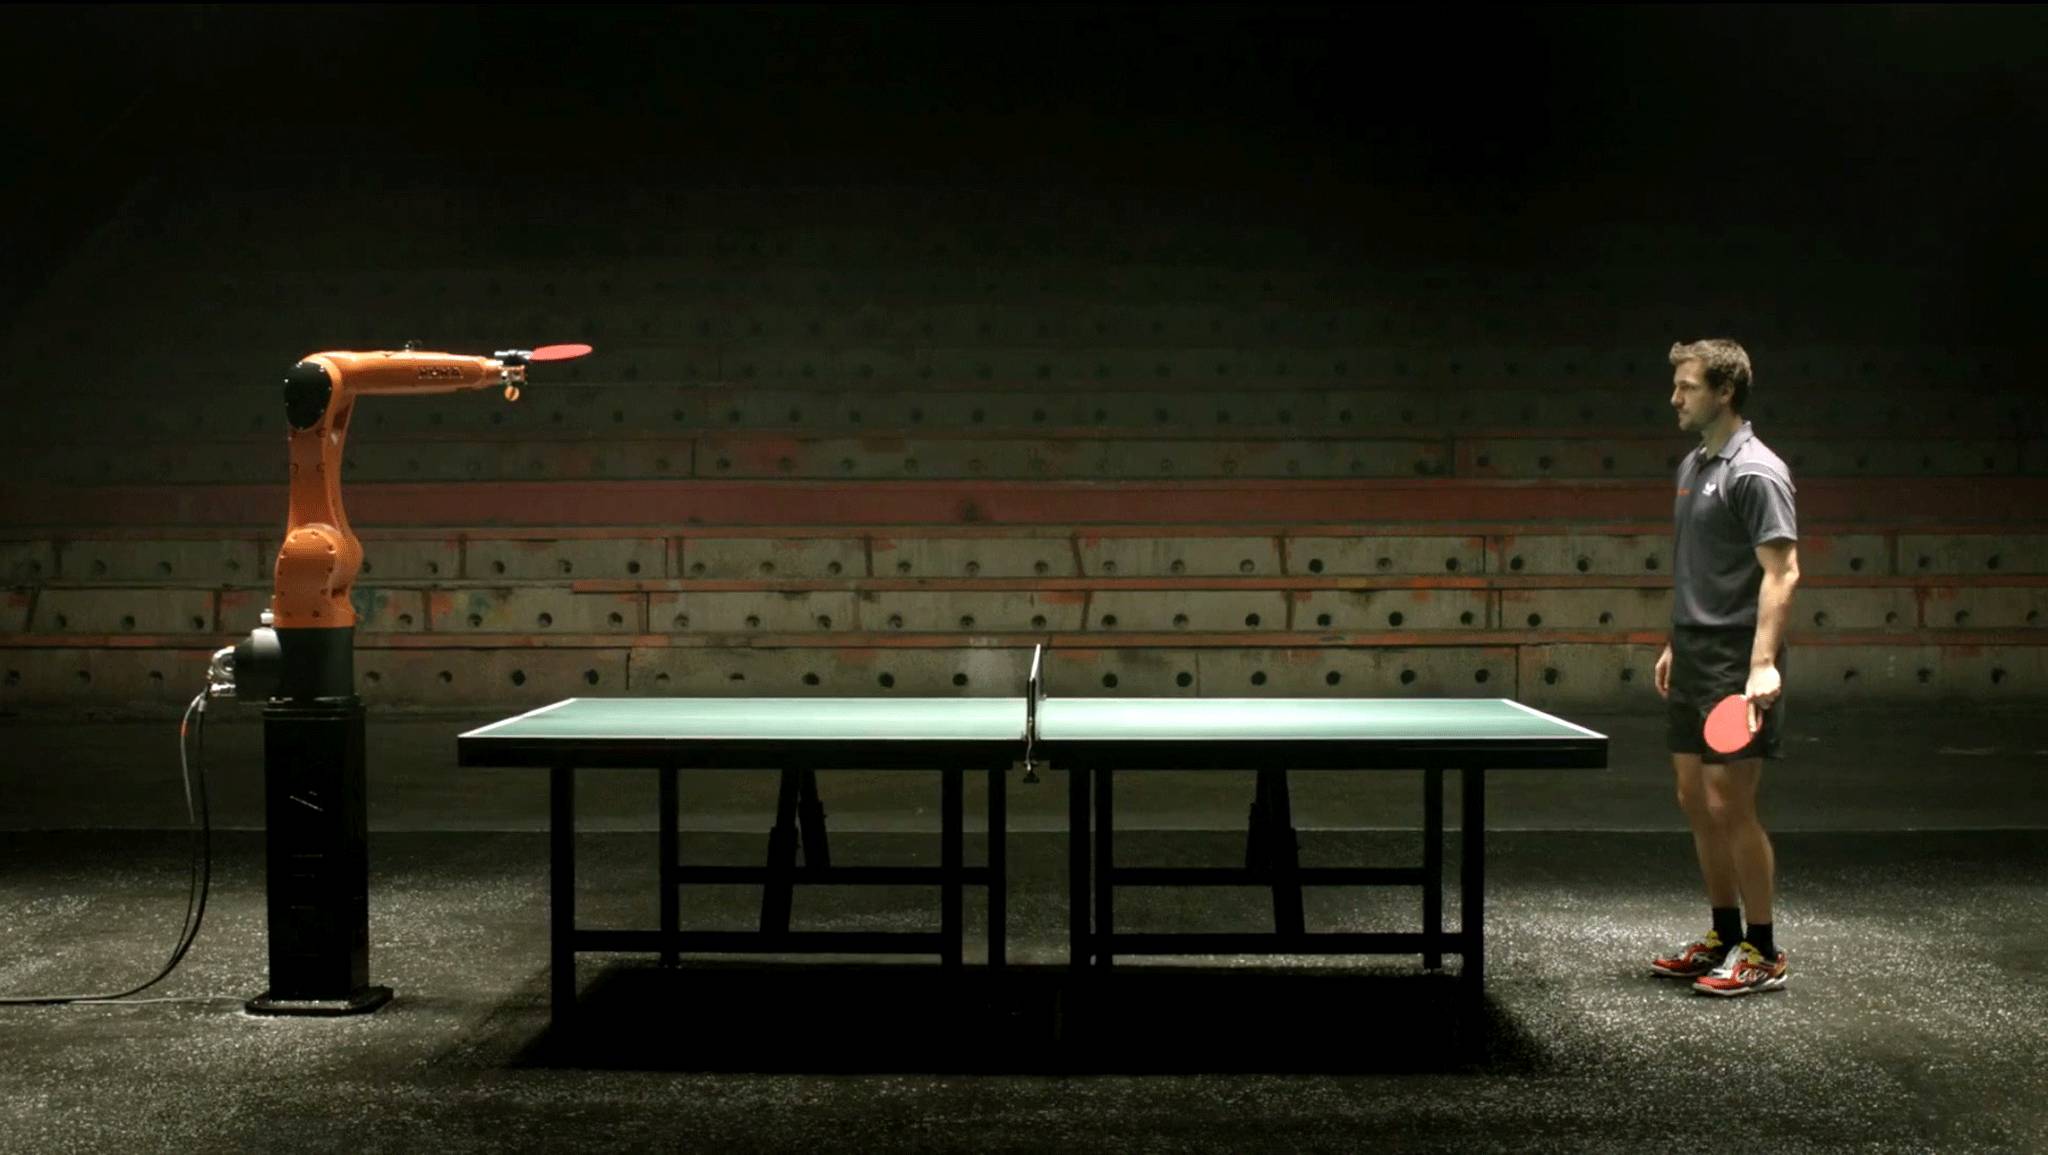 Everybody loses in ping pong match between robot and man - The Verge